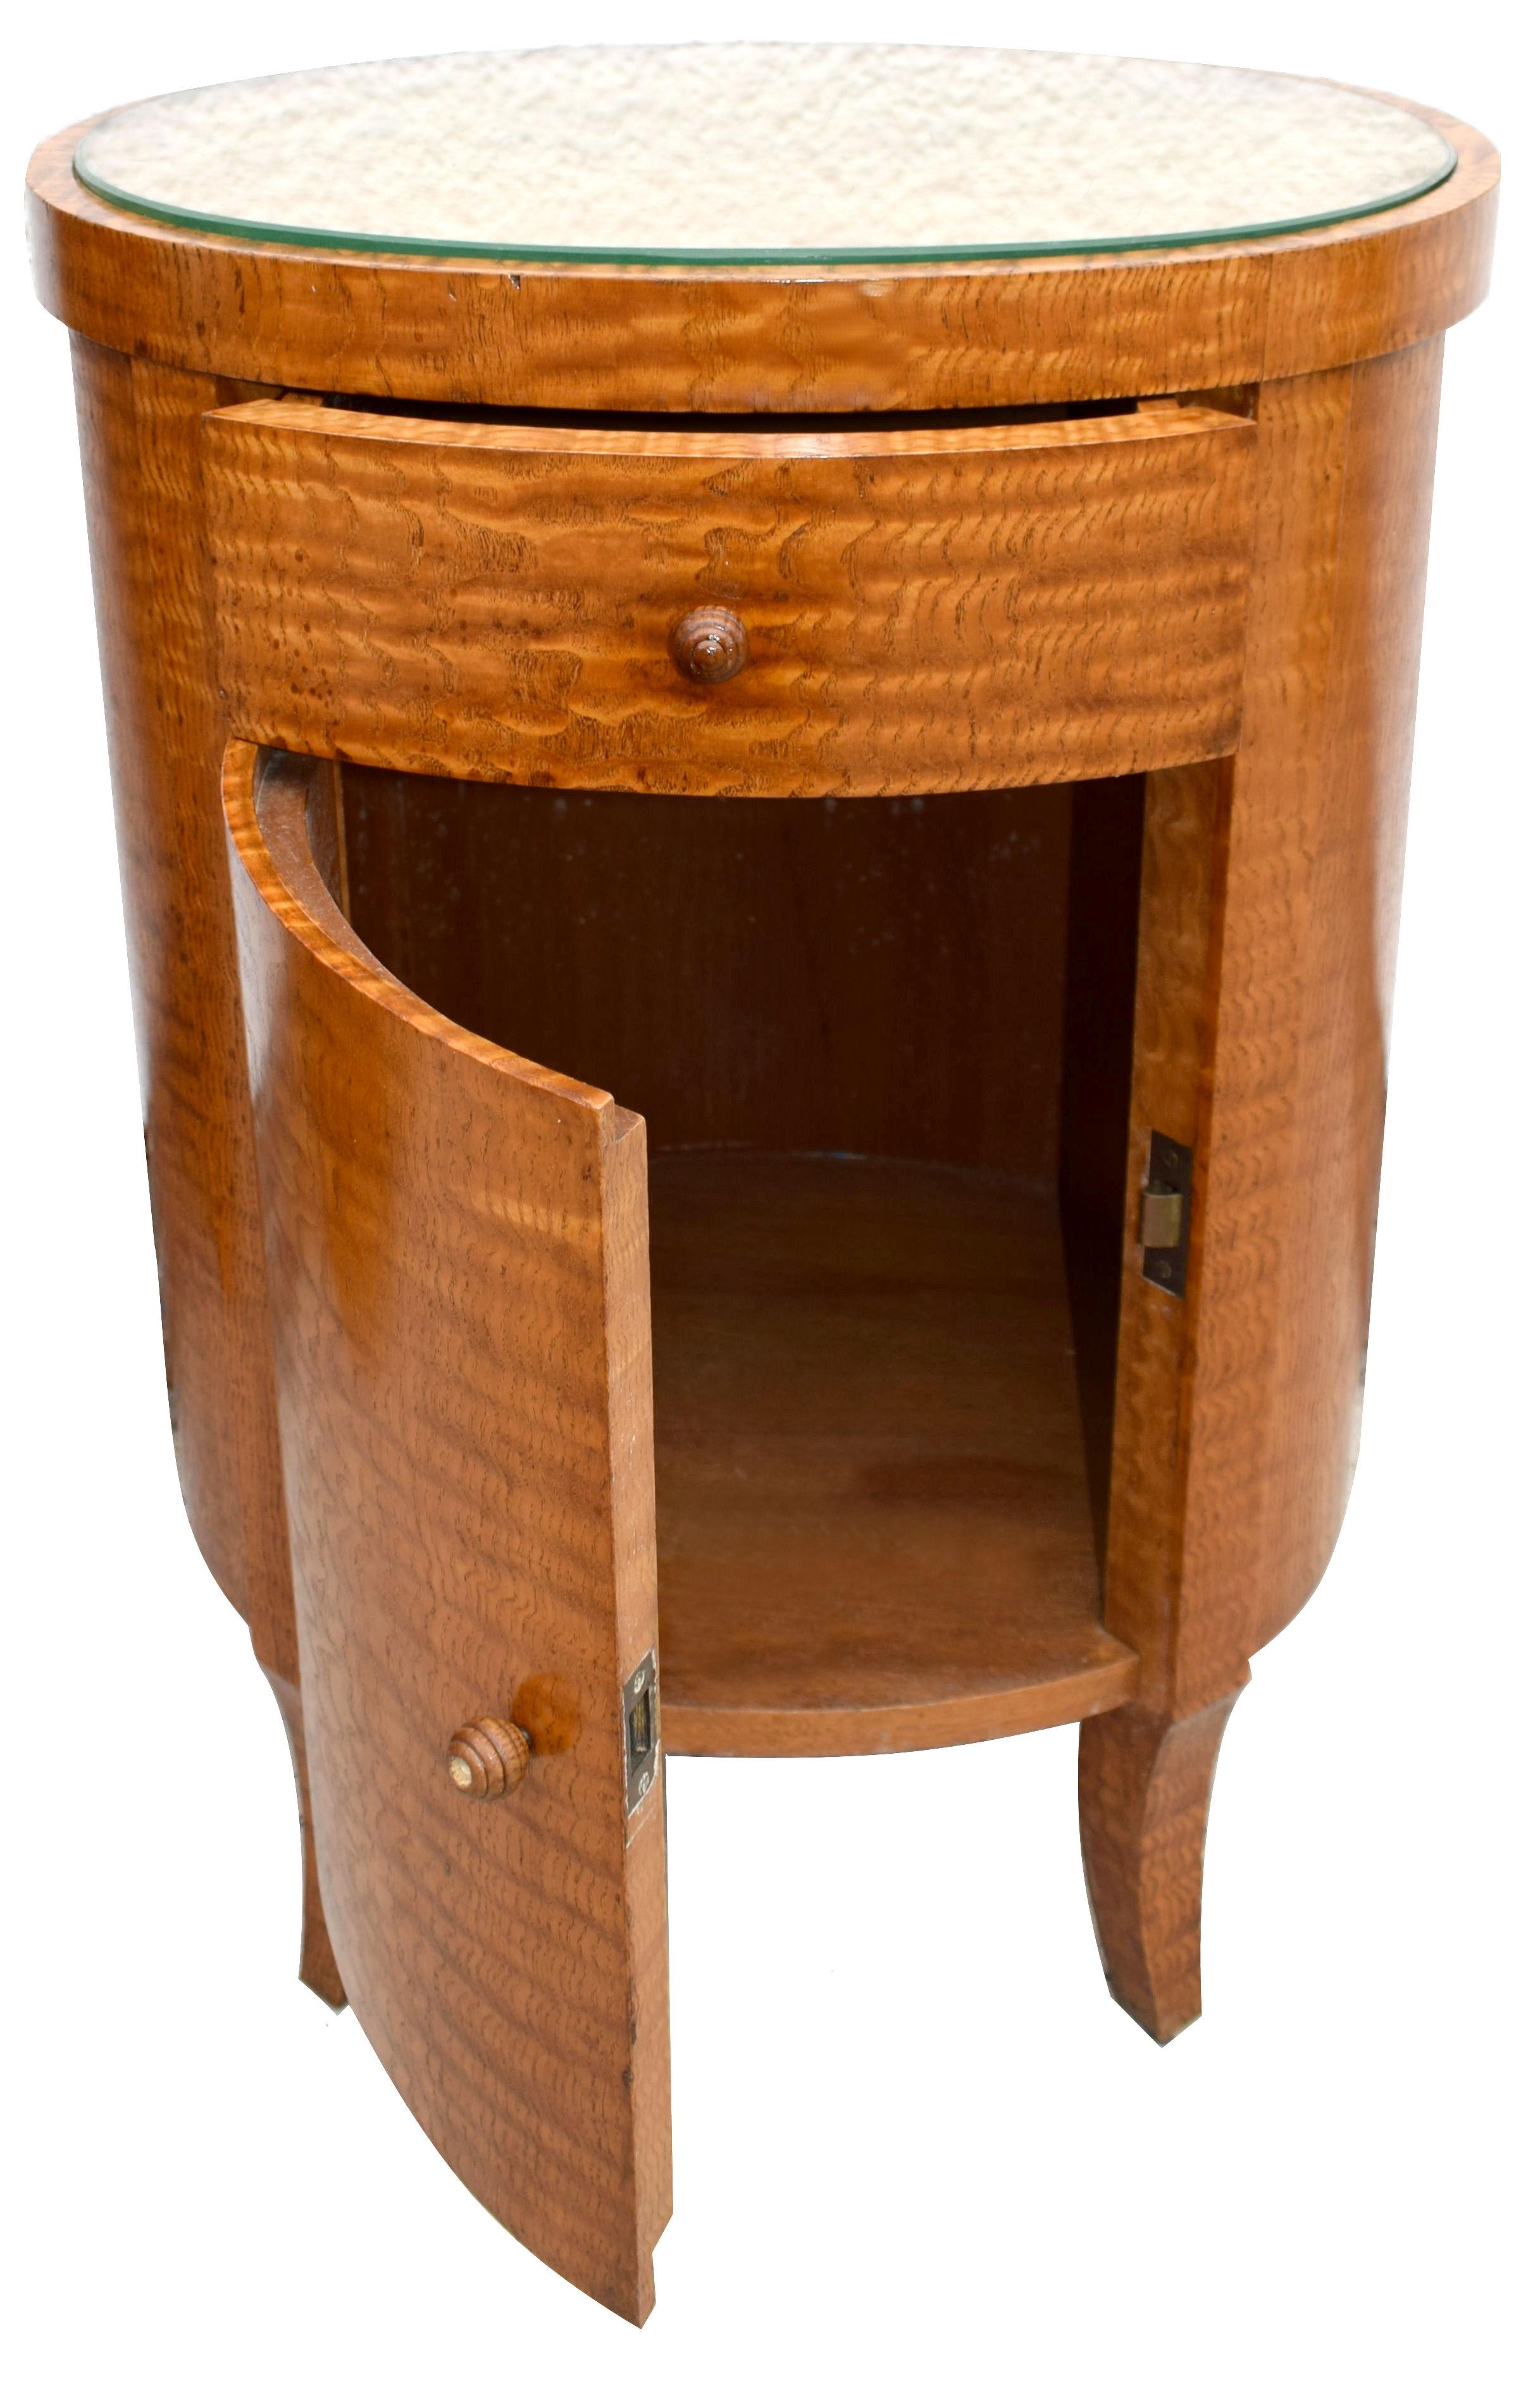 French Art Deco Cylindrical Chinese Burl Ash Cabinet, France, circa 1930